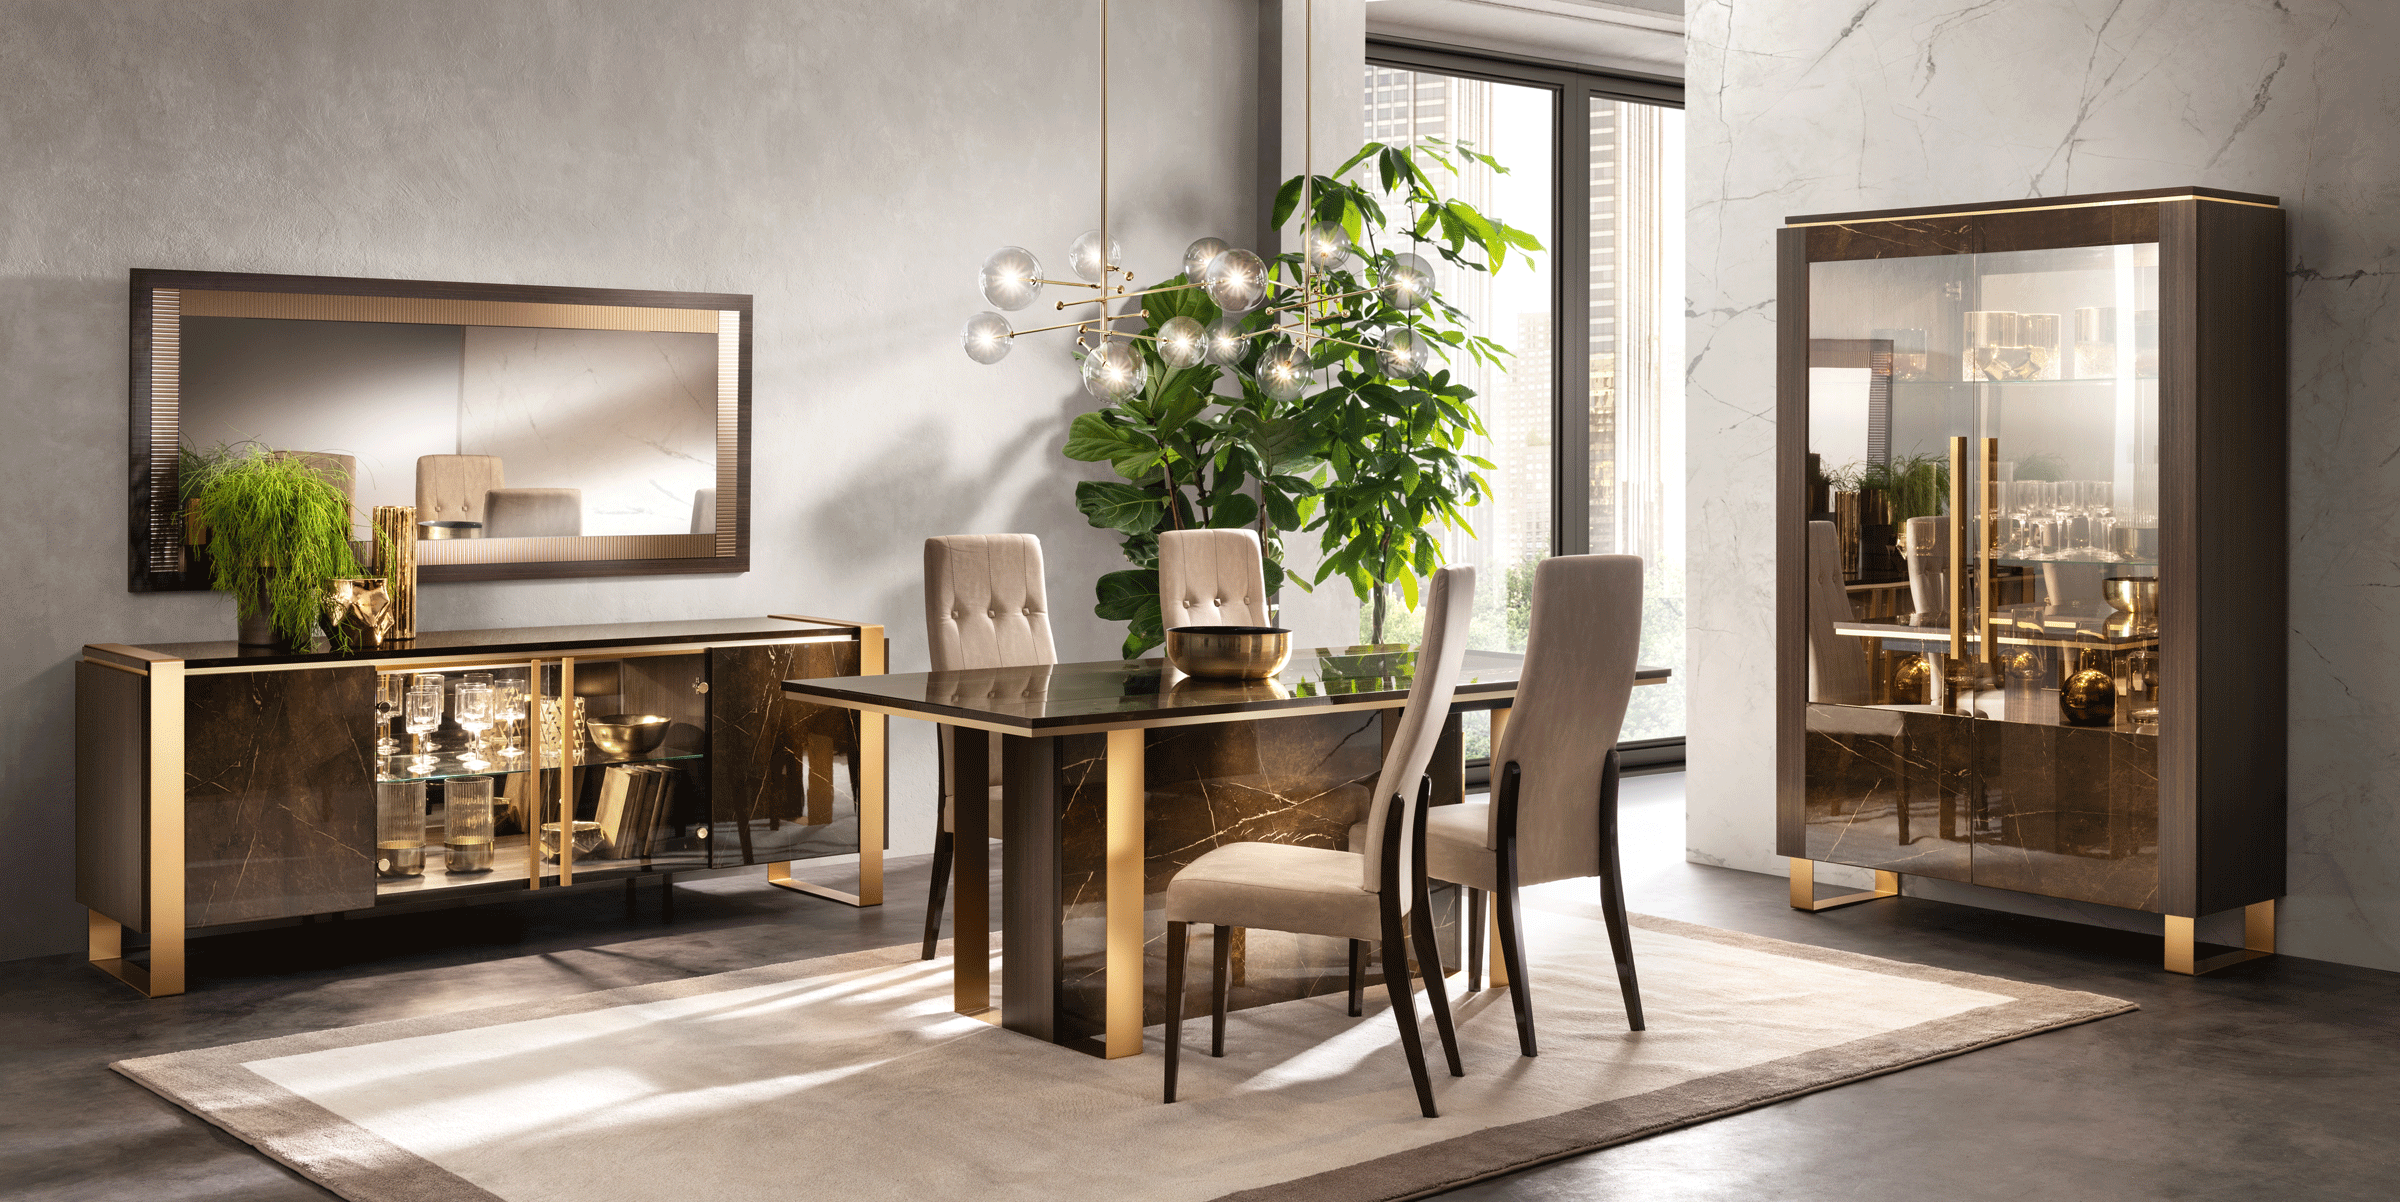 Brands Arredoclassic Living Room, Italy Essenza Dining by Arredoclassic, Italy Additional